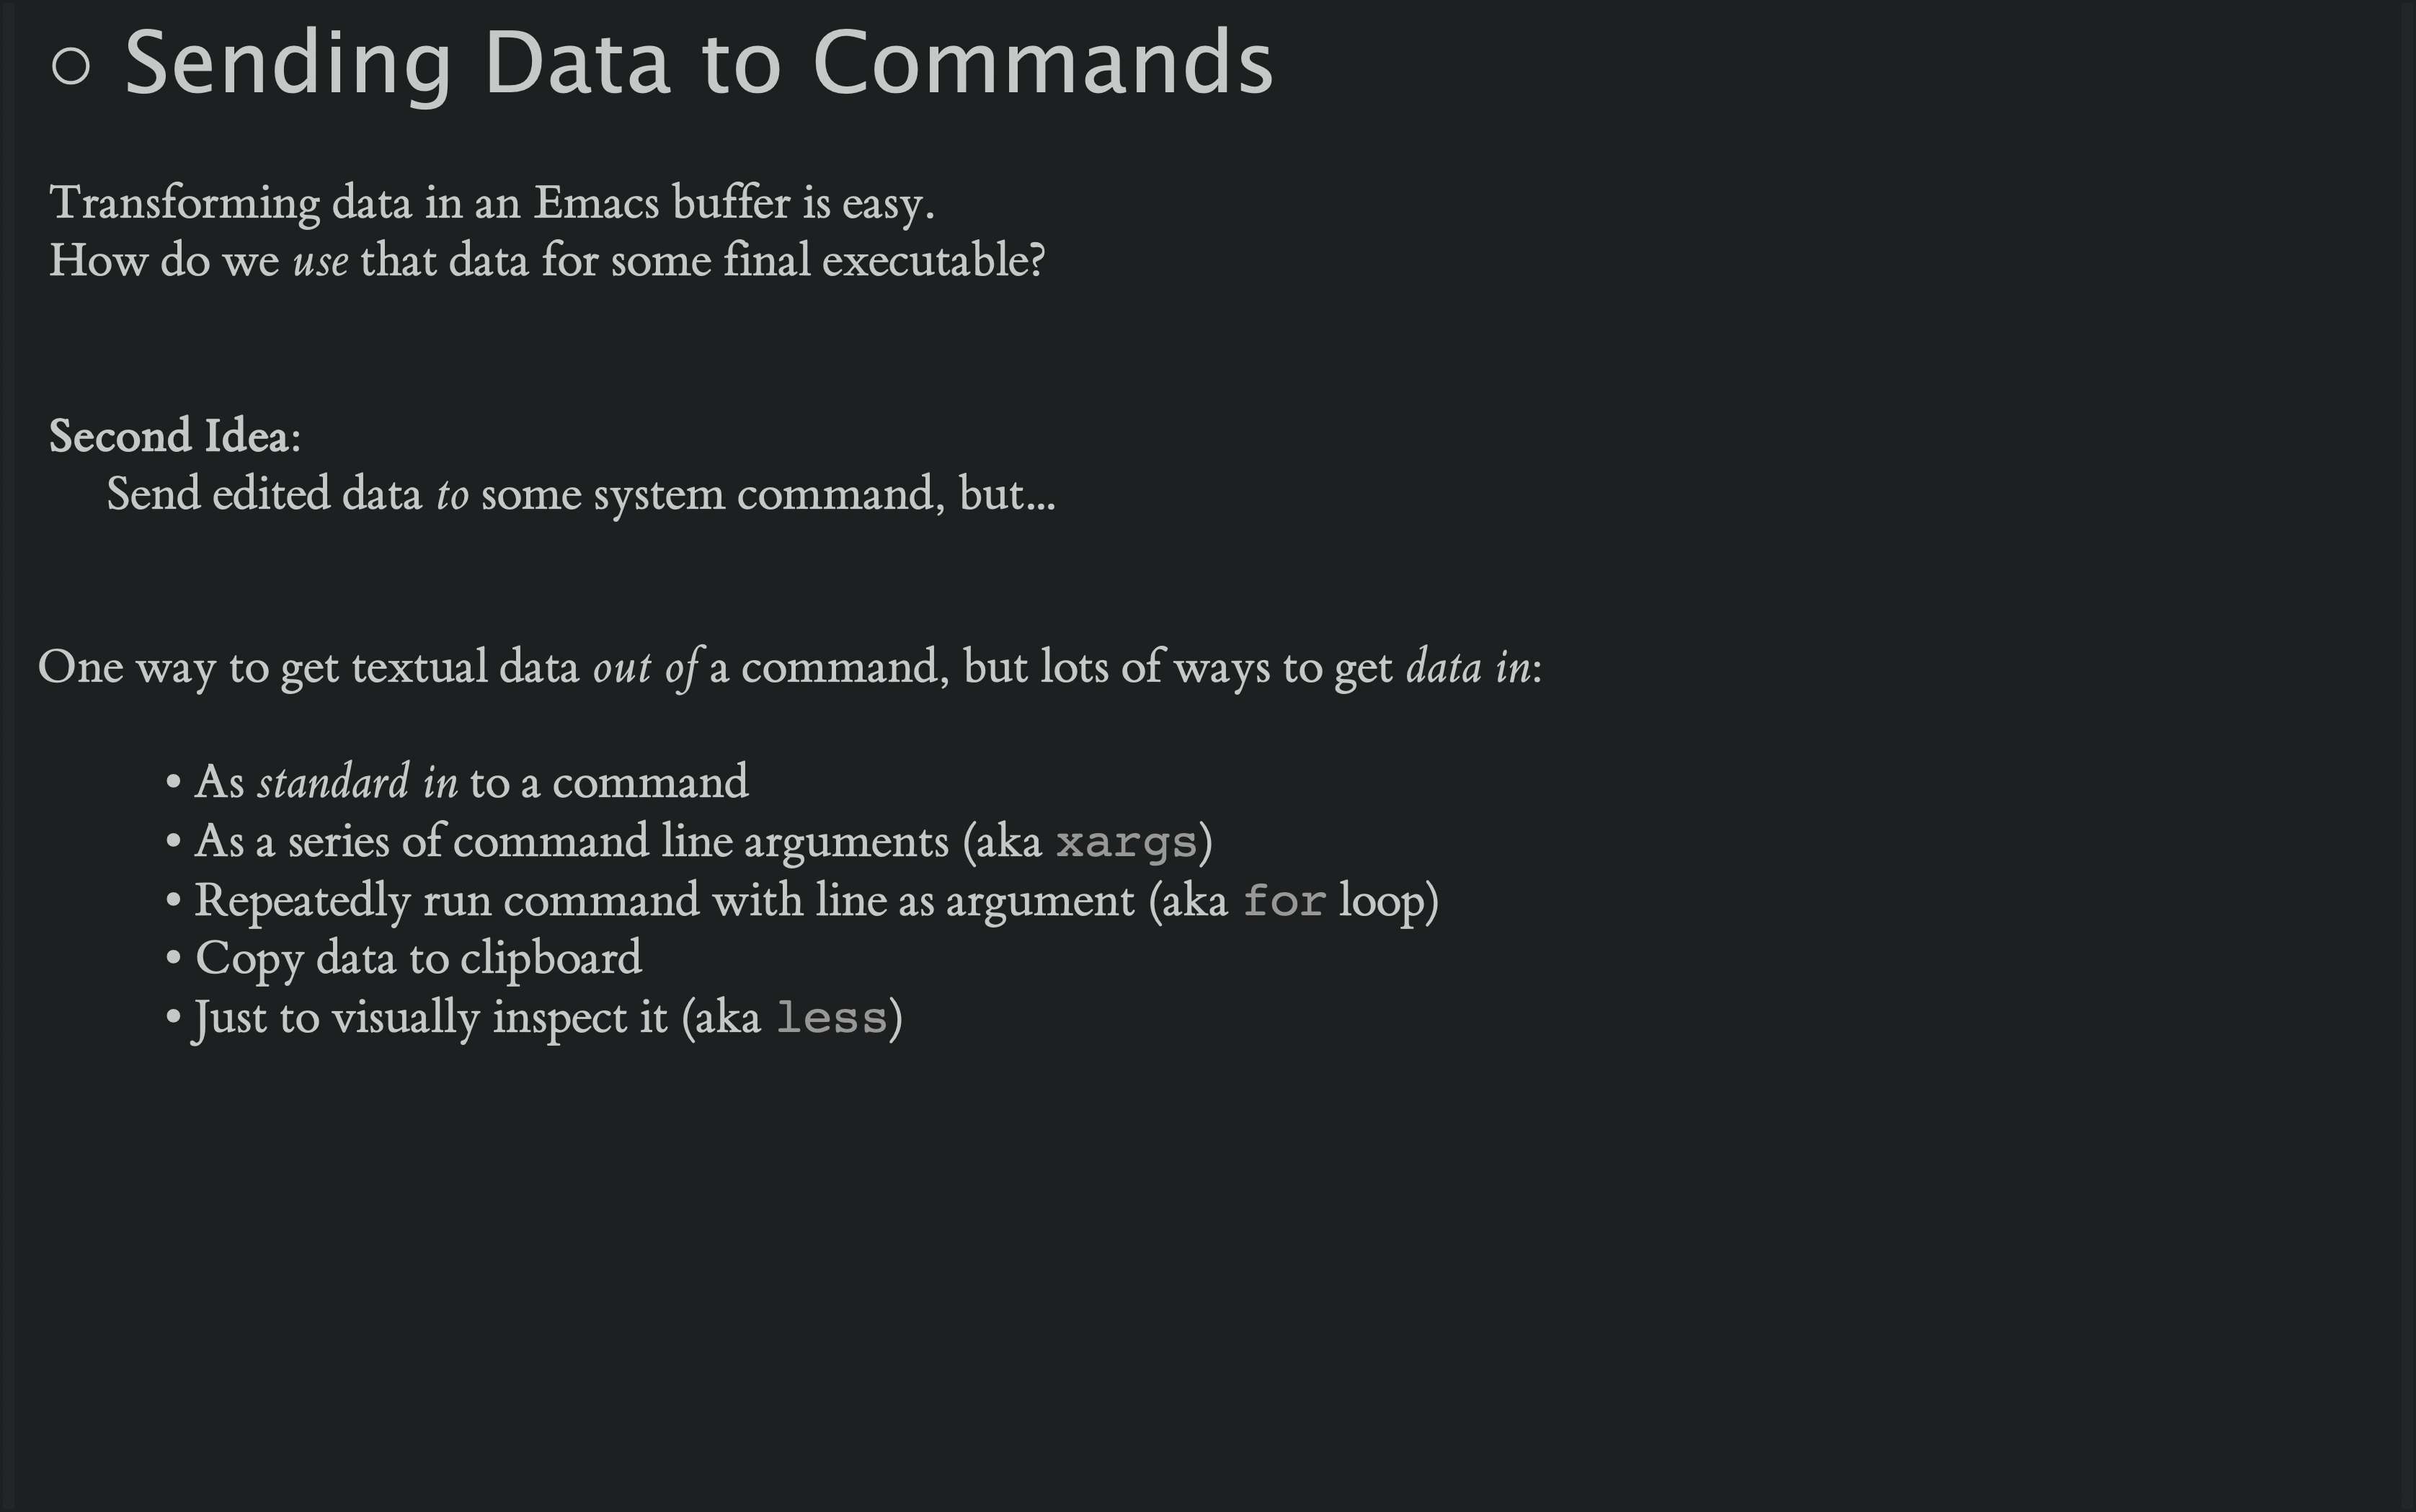 Sending data to commands is not as straight-forward as transforming the data in an Emacs buffer.